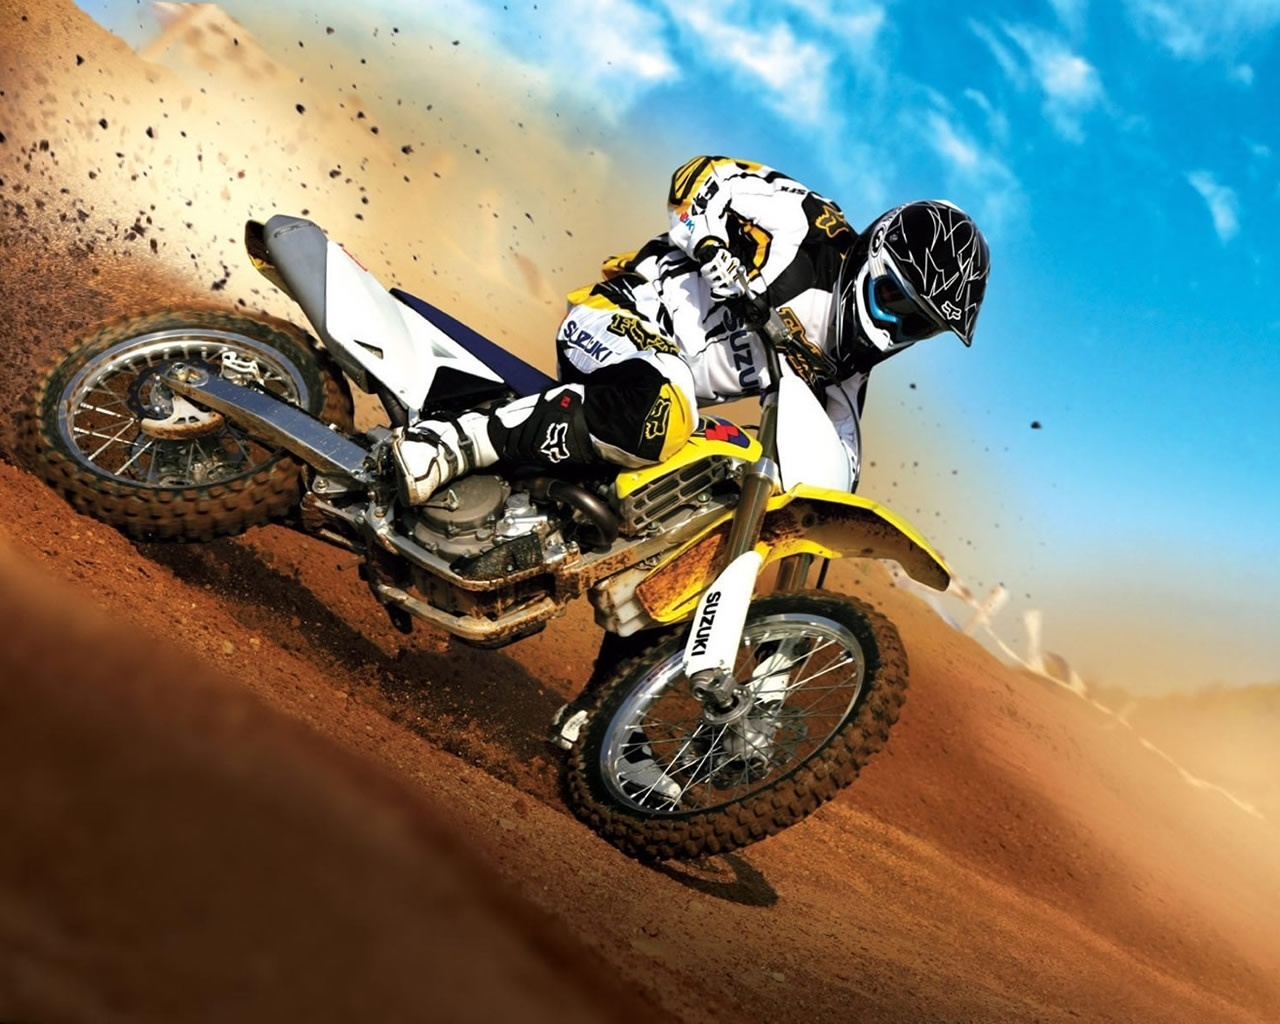 Moto Sports for 1280 x 1024 resolution